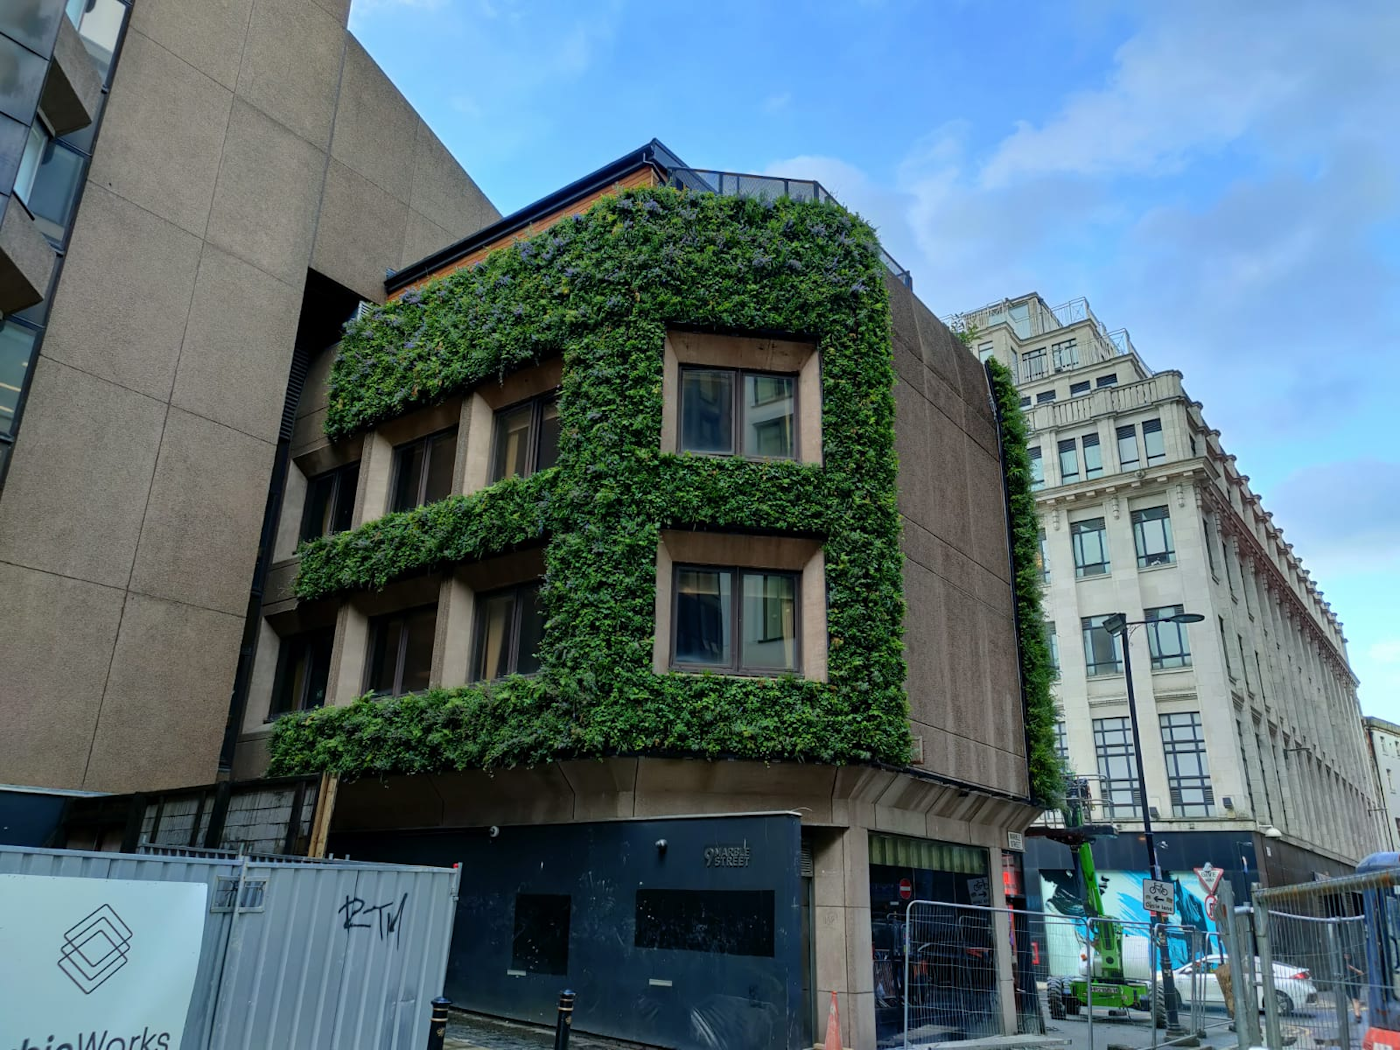 green wall on side of 1960s style building around windows